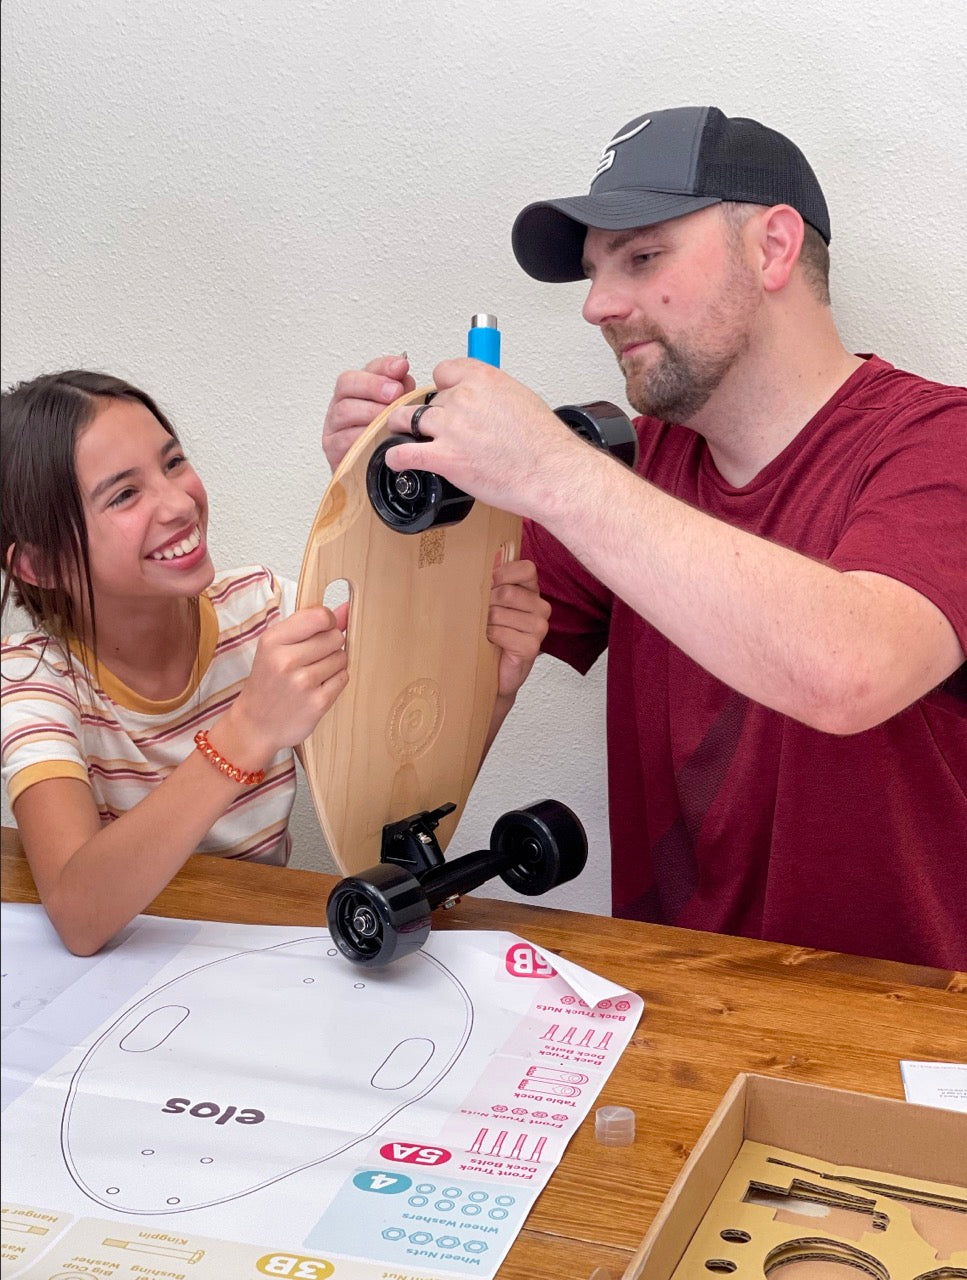 father and daughter bonding while assembling Elos DIY Kit for quality family time